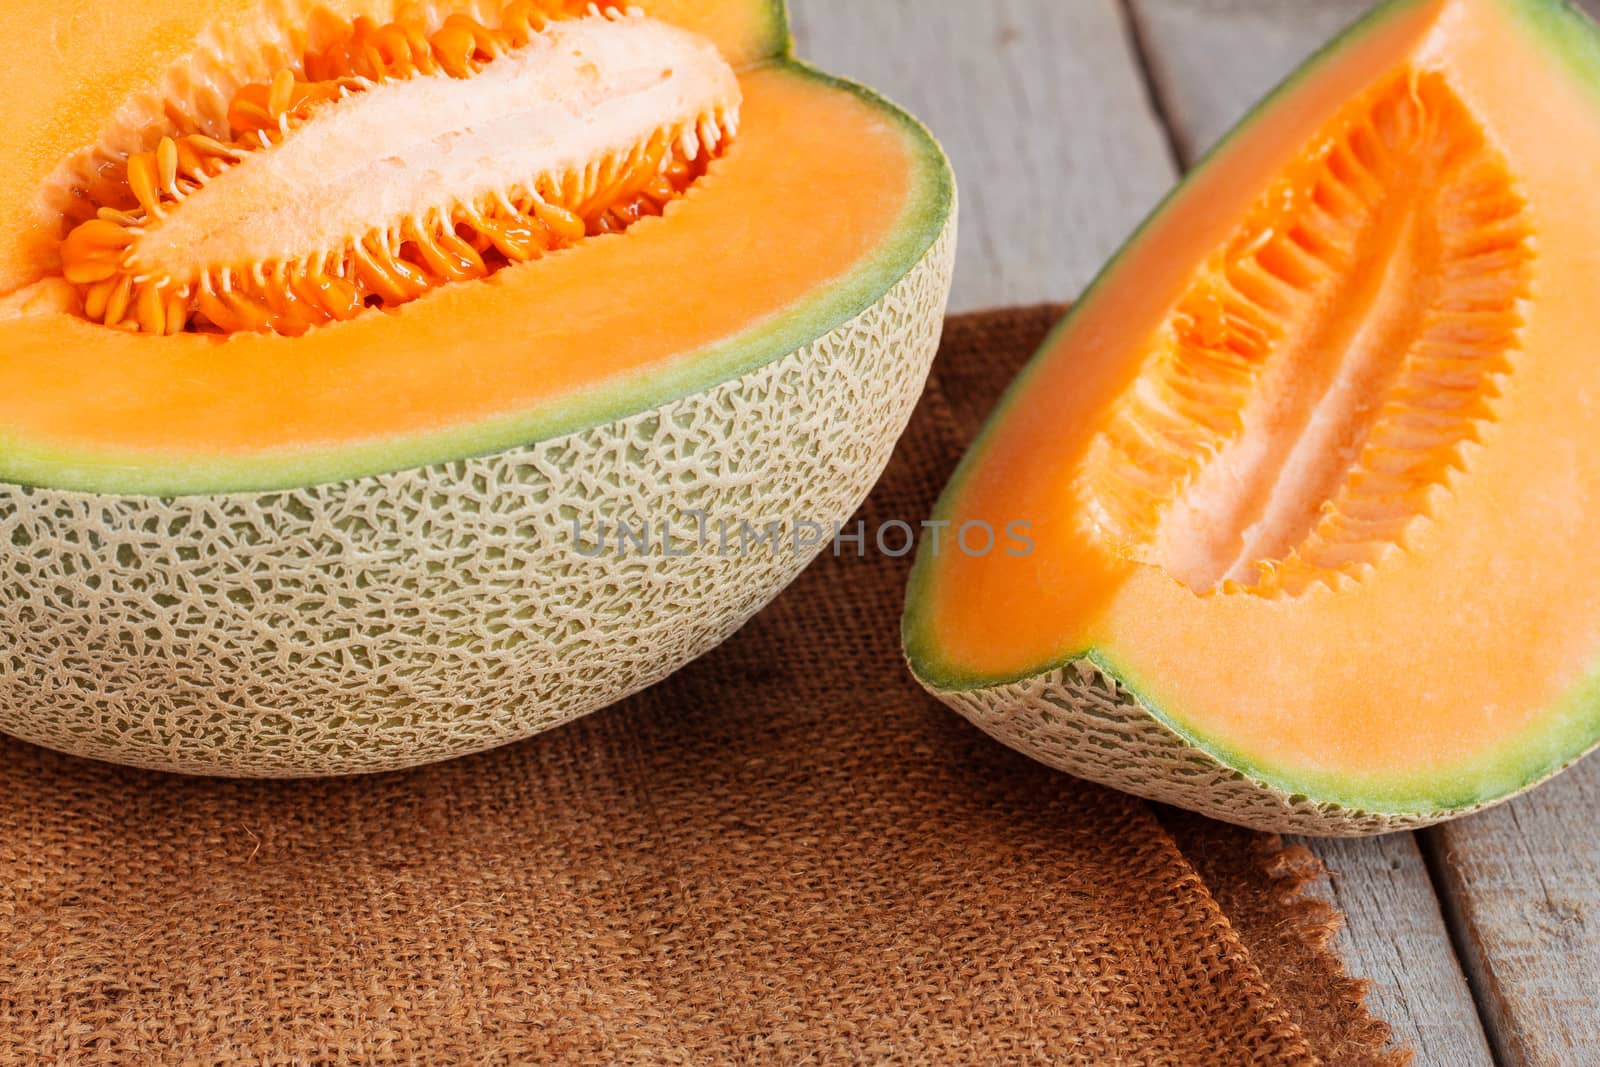 Melon sliced on wooden. by start08